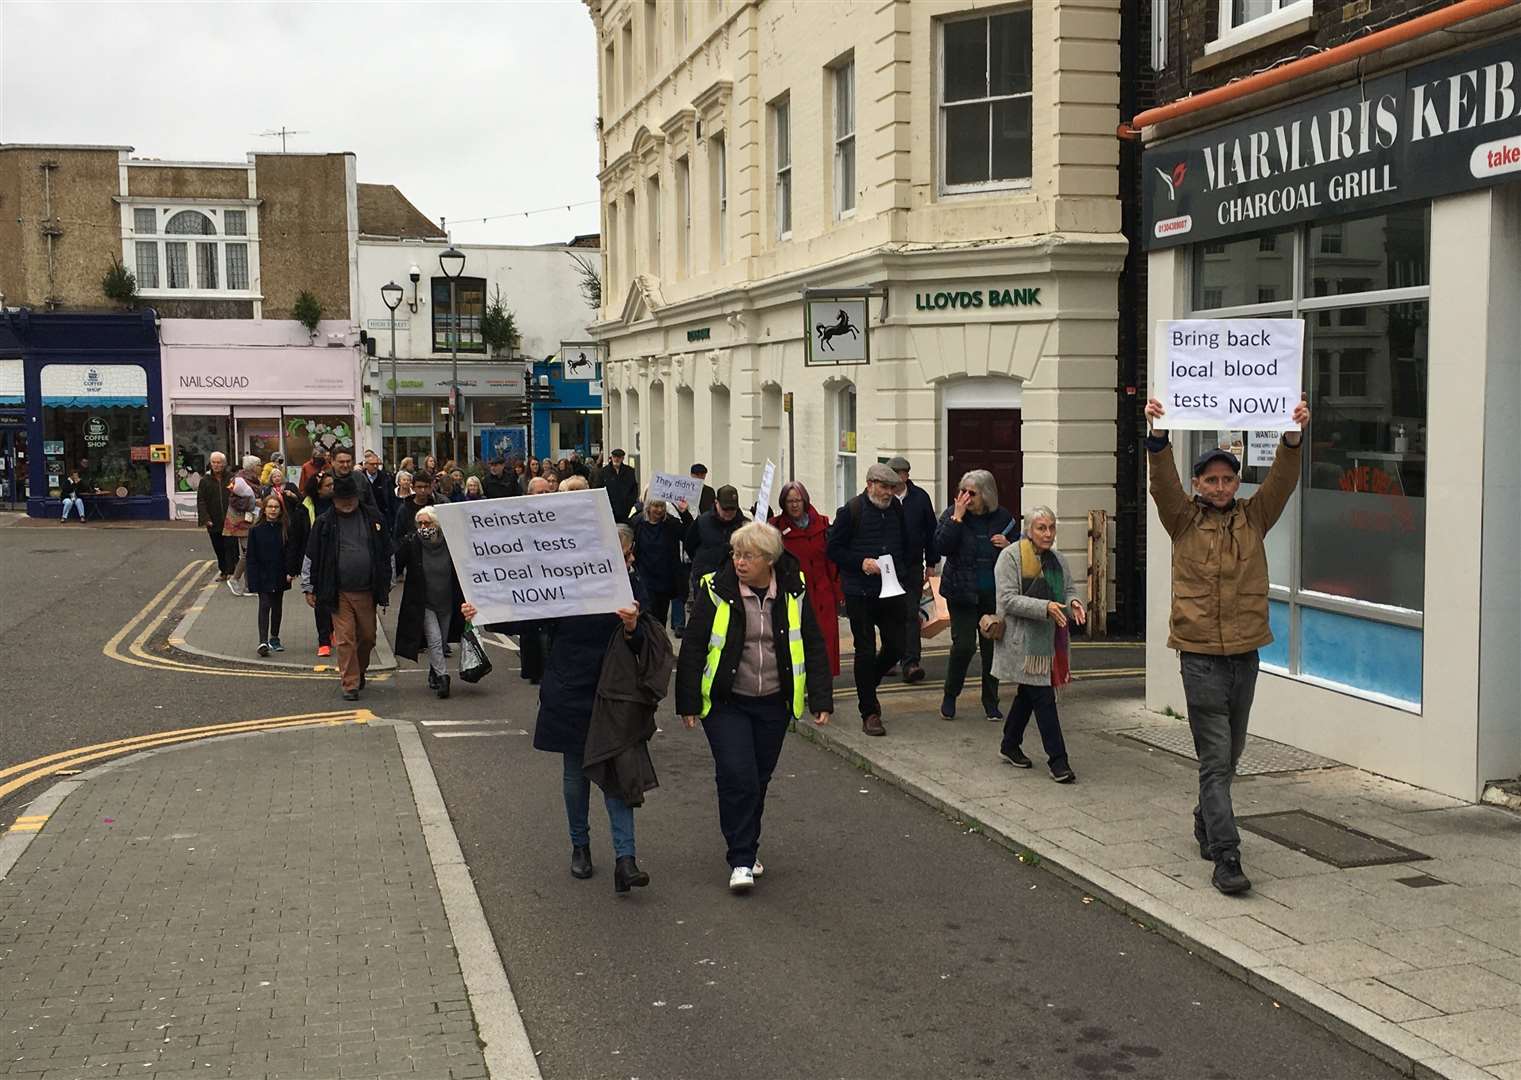 Protesters previously campaigned against the closure of blood tests at Deal hospital. Photo: Tony Grist